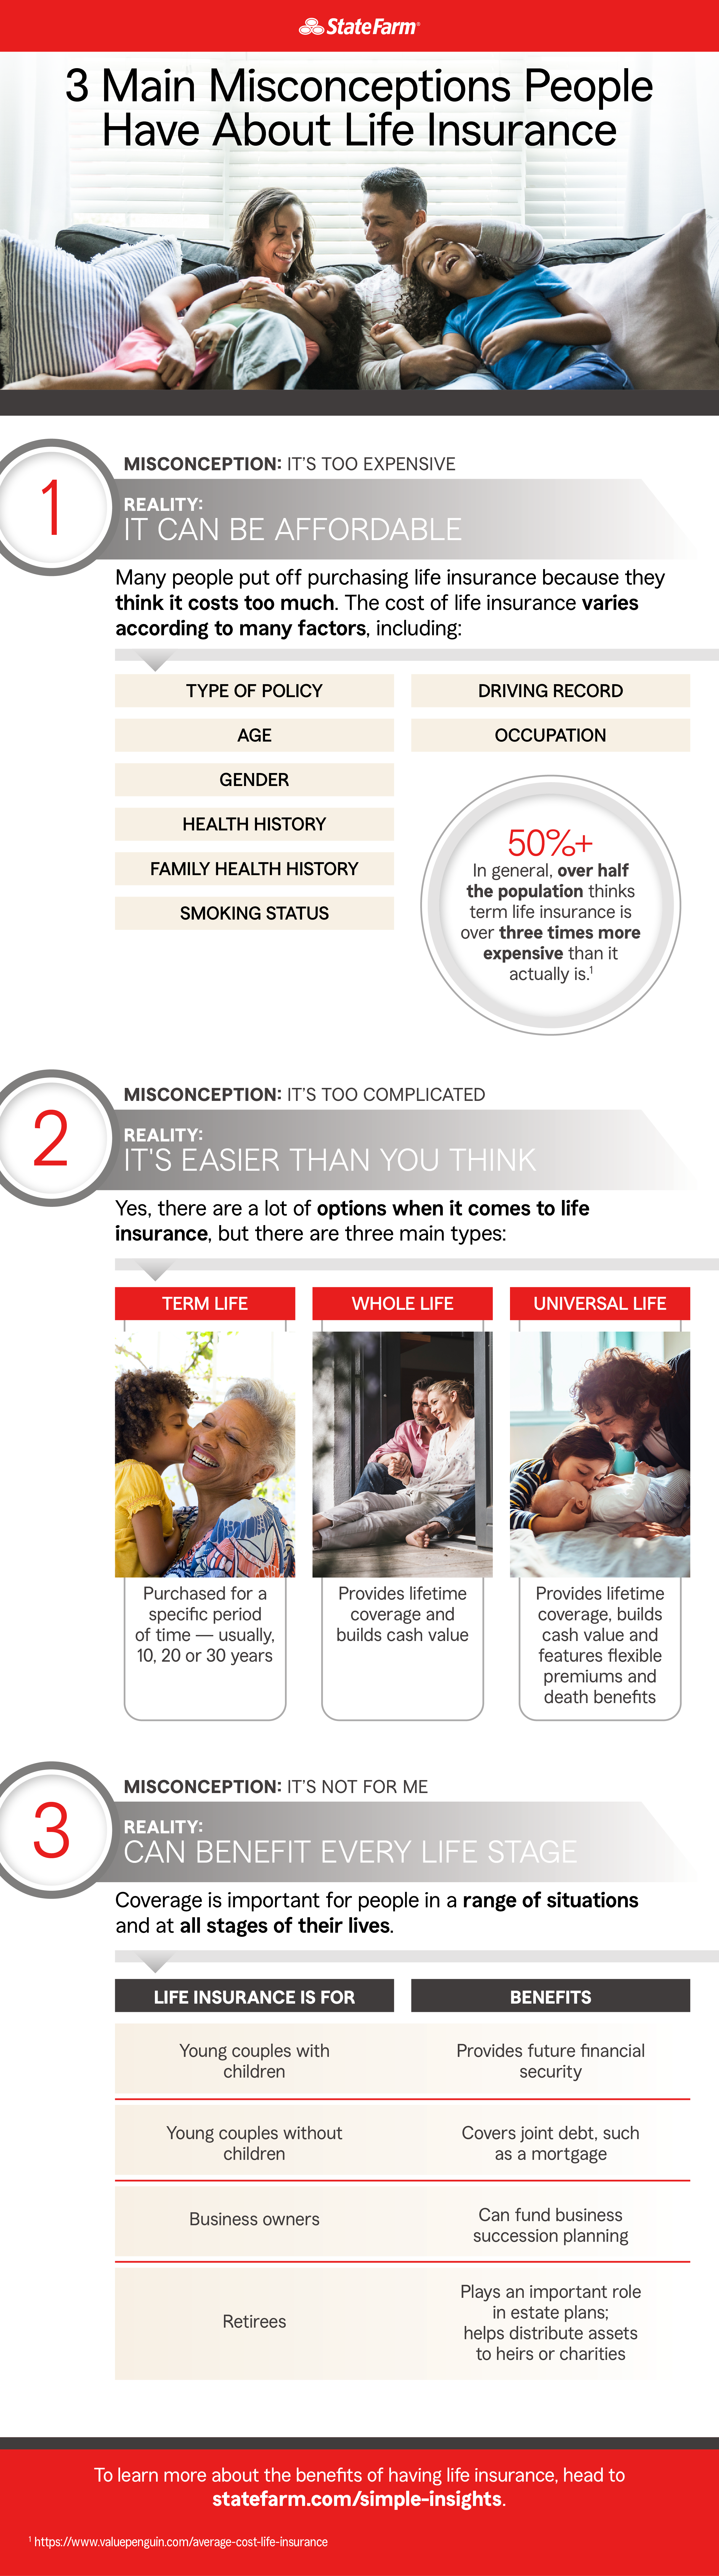 Infographic that shares three main misconceptions people have about life insurance.